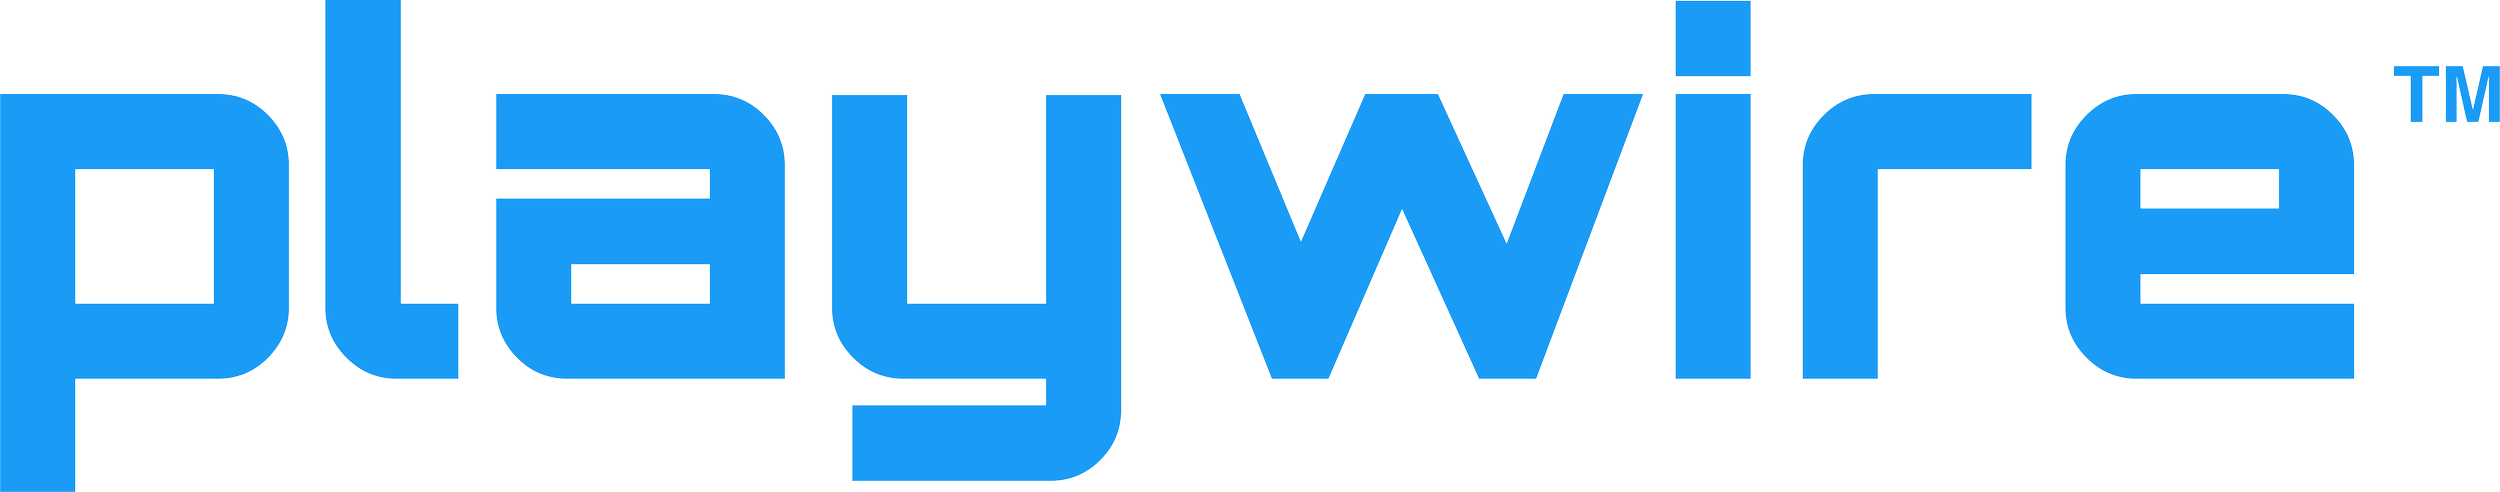 Playwire logo.png